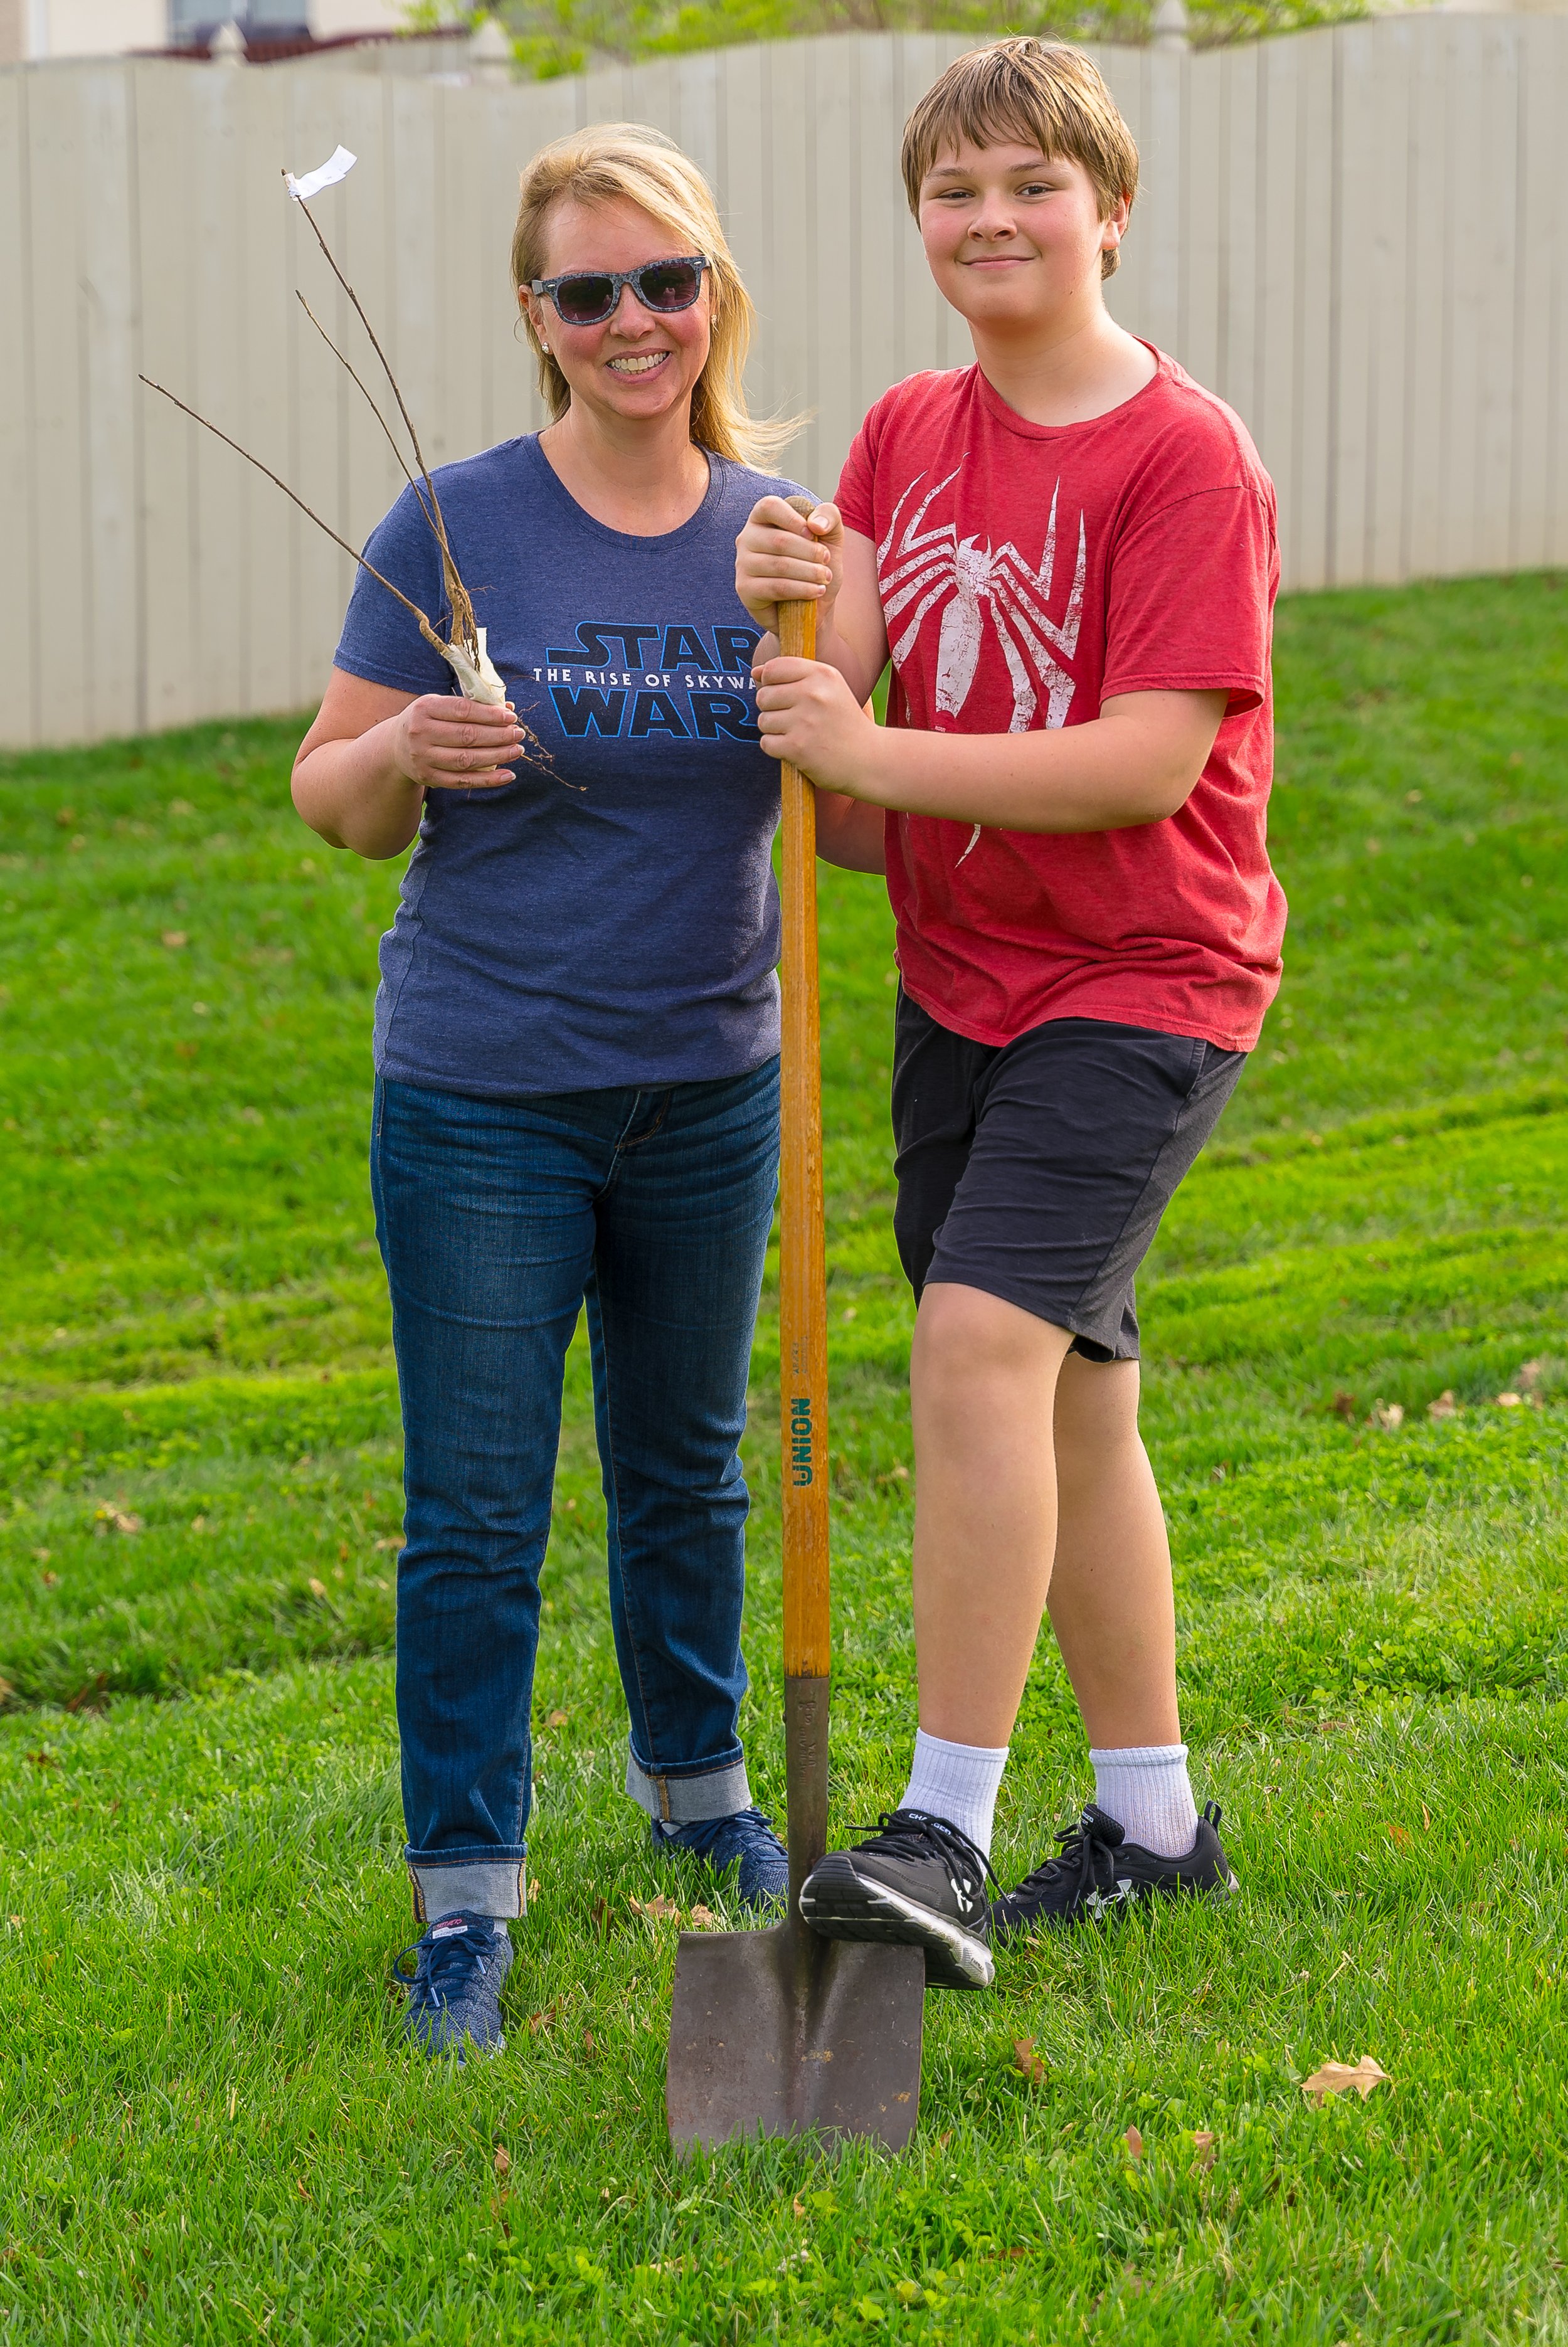 Attorney Laura A. Scott And Son Planting A Tree.jpg